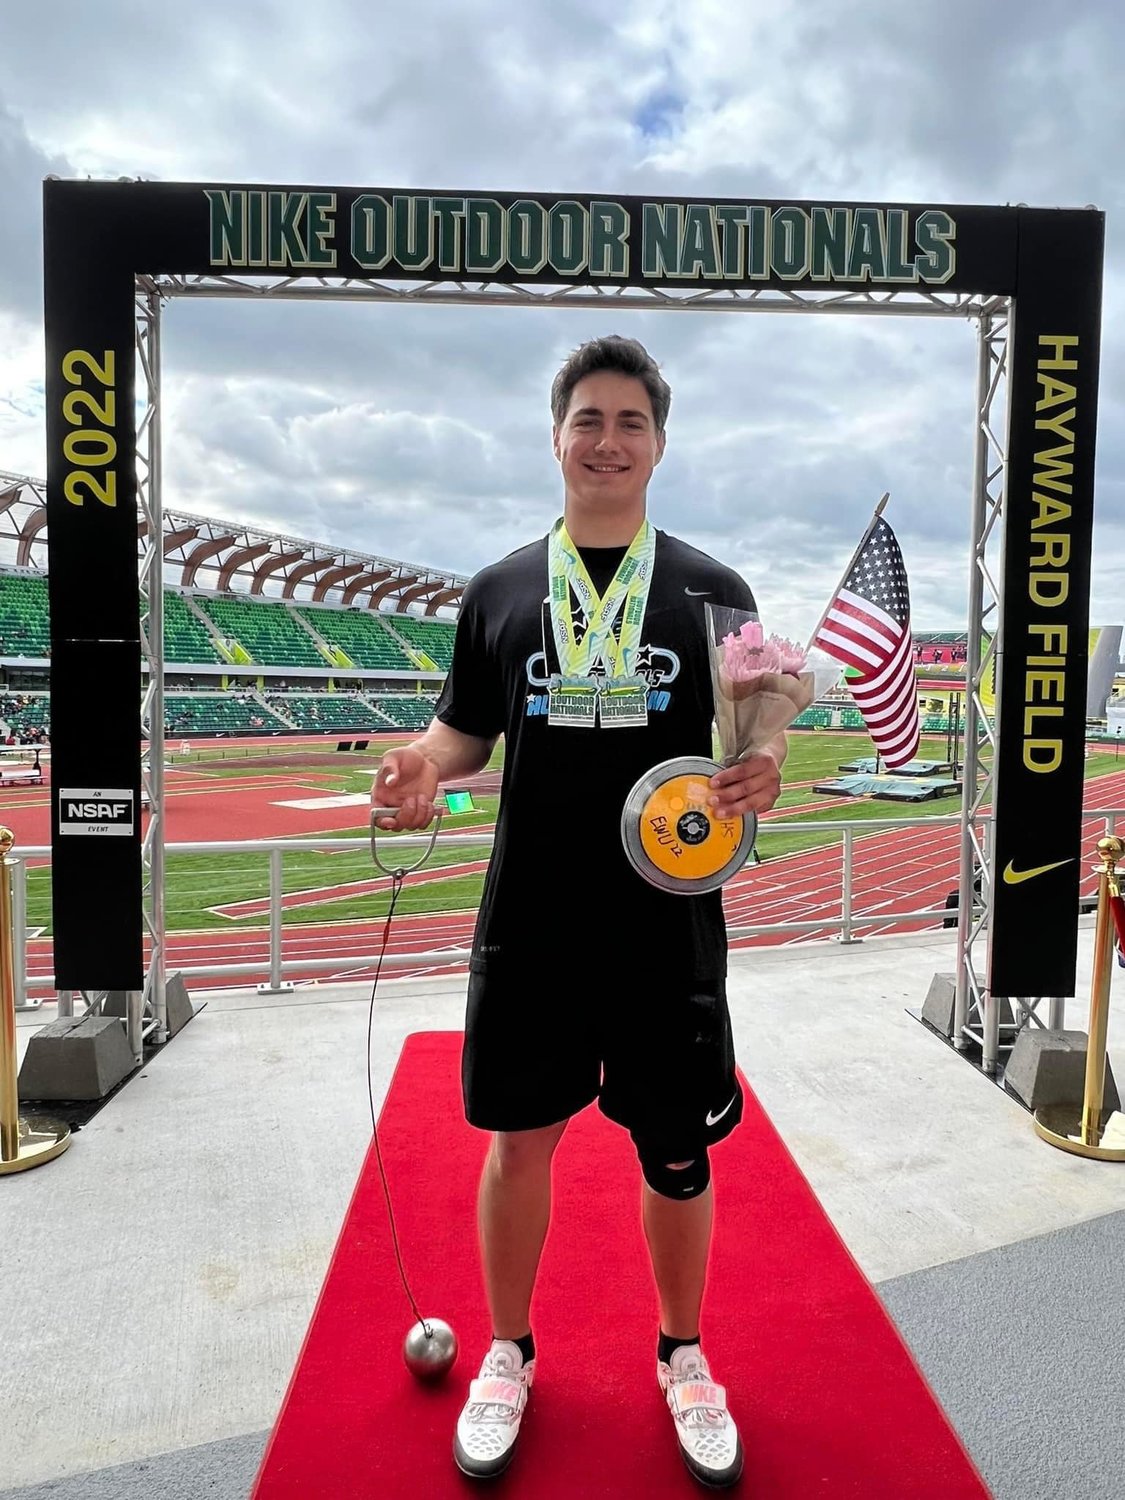 Rainier graduate Jeremiah Nubbe poses with his medals after winning both the hammer and discus at the 2022 Nike Outdoor Nationals meet in Eugene, Oregon at Hayward Field June 19.